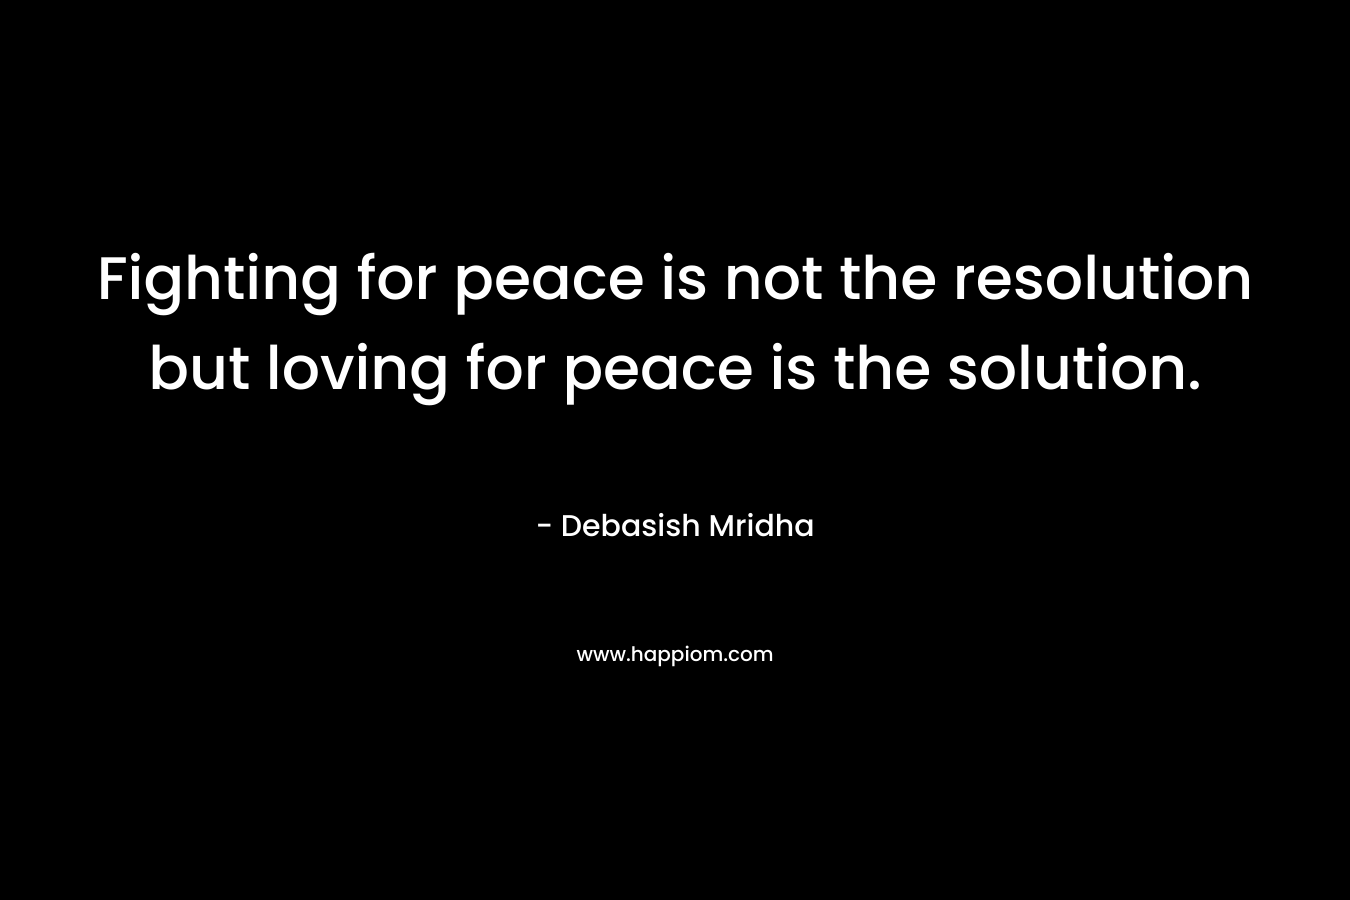 Fighting for peace is not the resolution but loving for peace is the solution. – Debasish Mridha